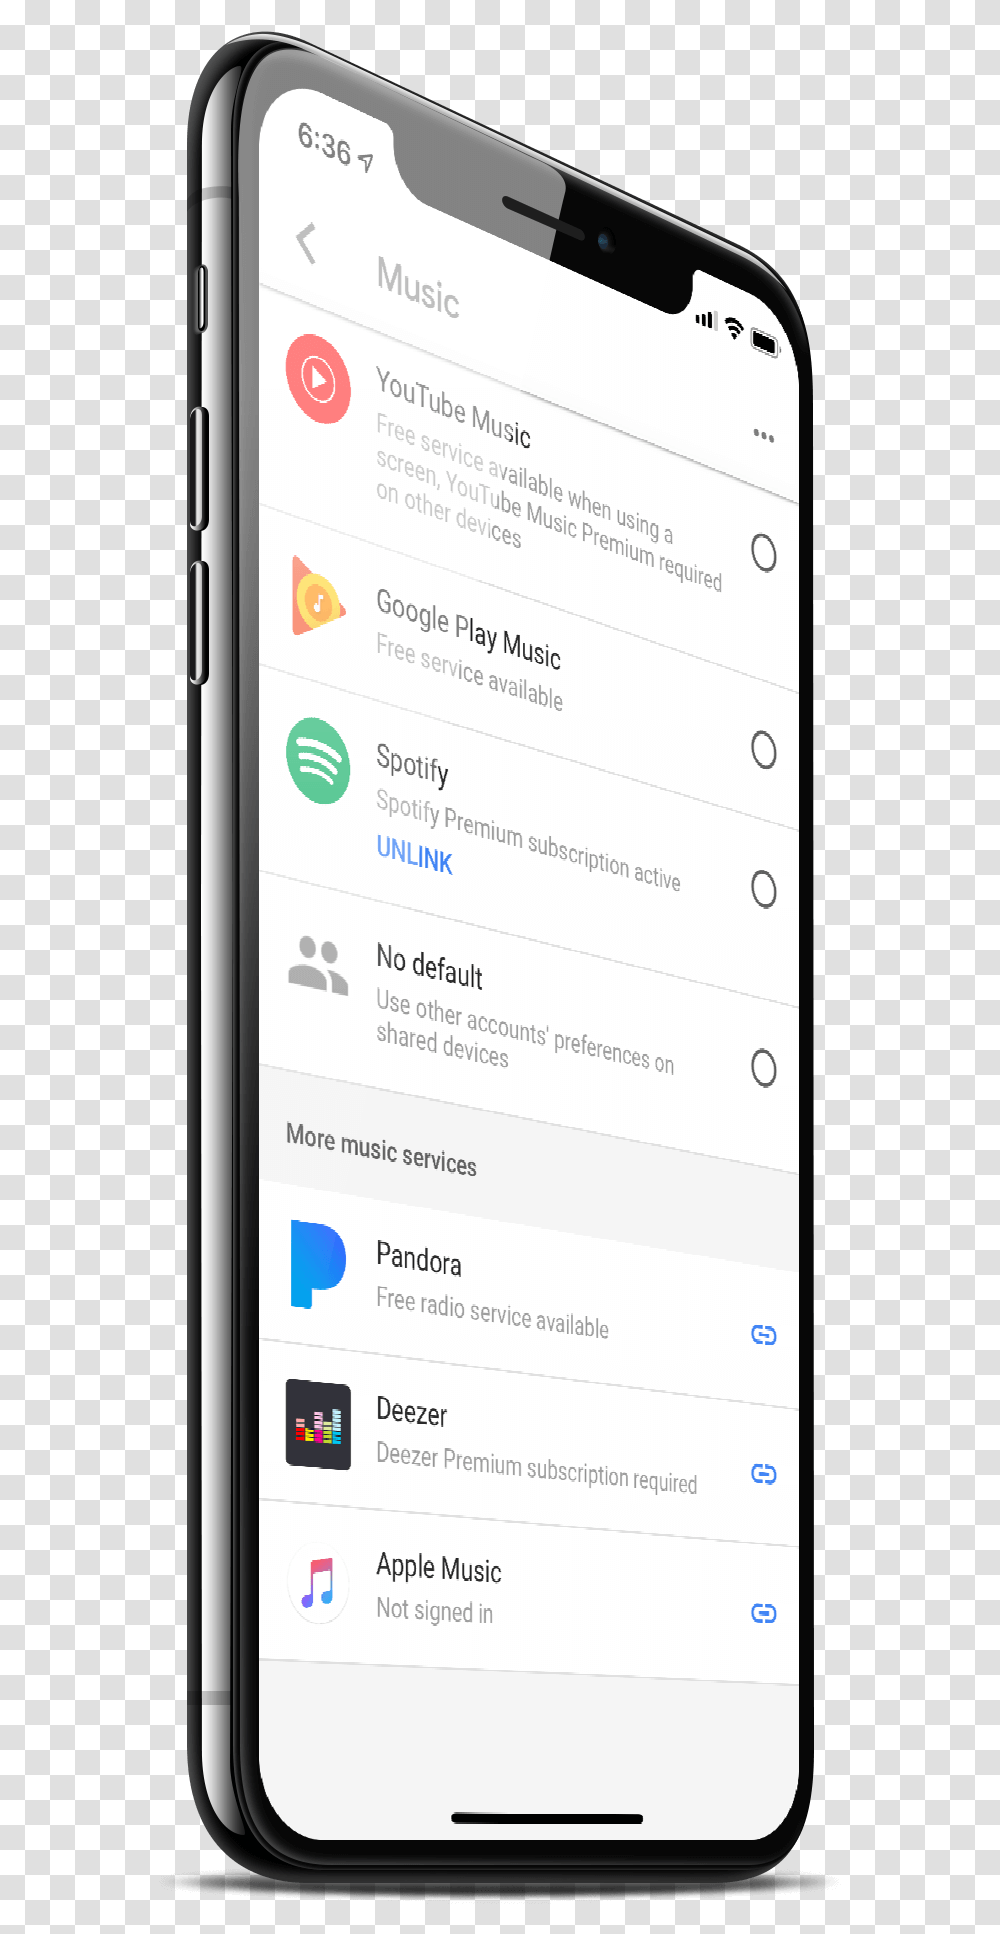 Apple Music In The Google Home App Smartphone, Mobile Phone, Electronics, Cell Phone, Iphone Transparent Png